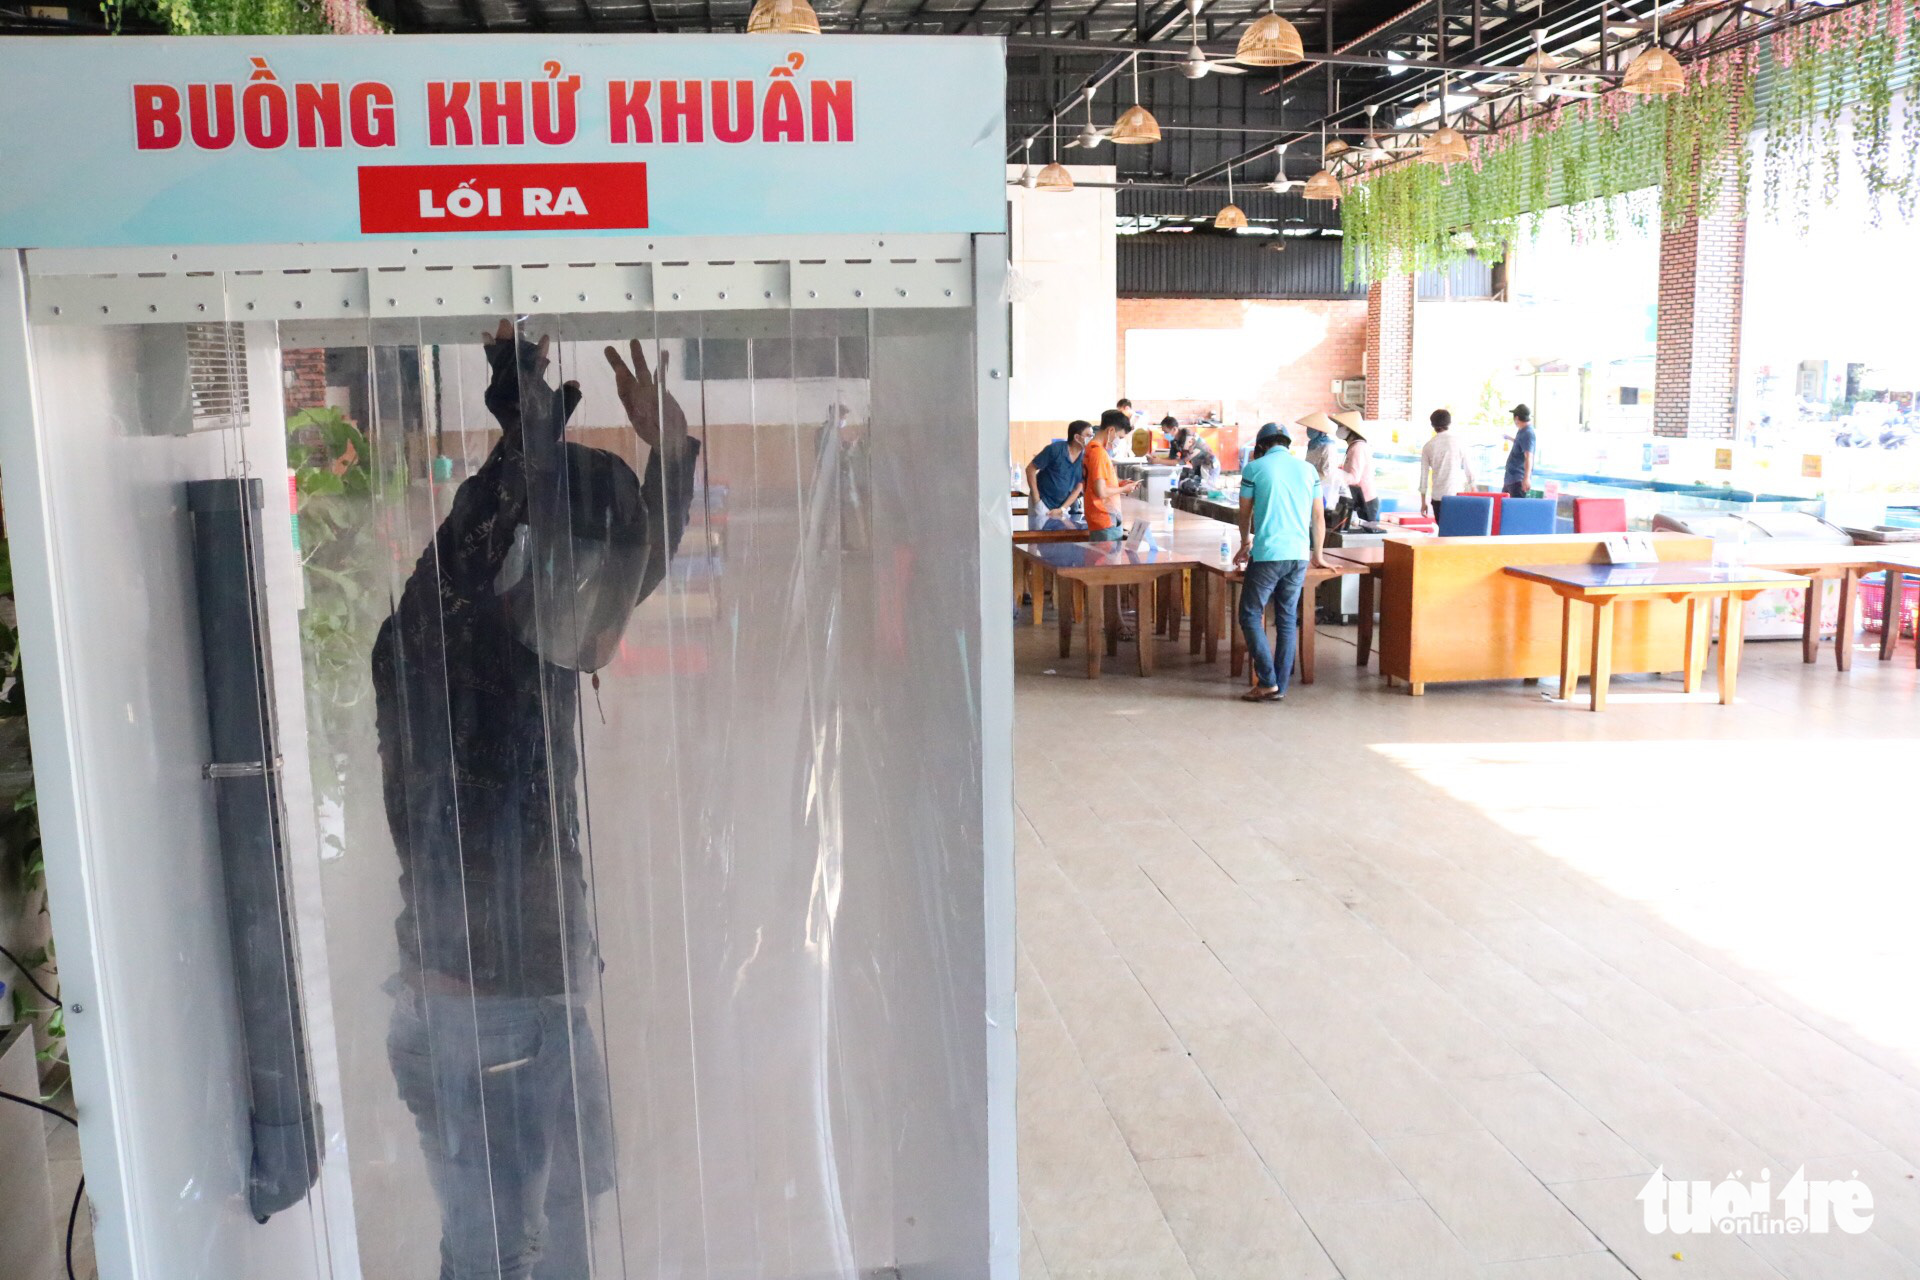 A disinfection chamber is placed at the entrance of the store. Photo: Hoang An / Tuoi Tre